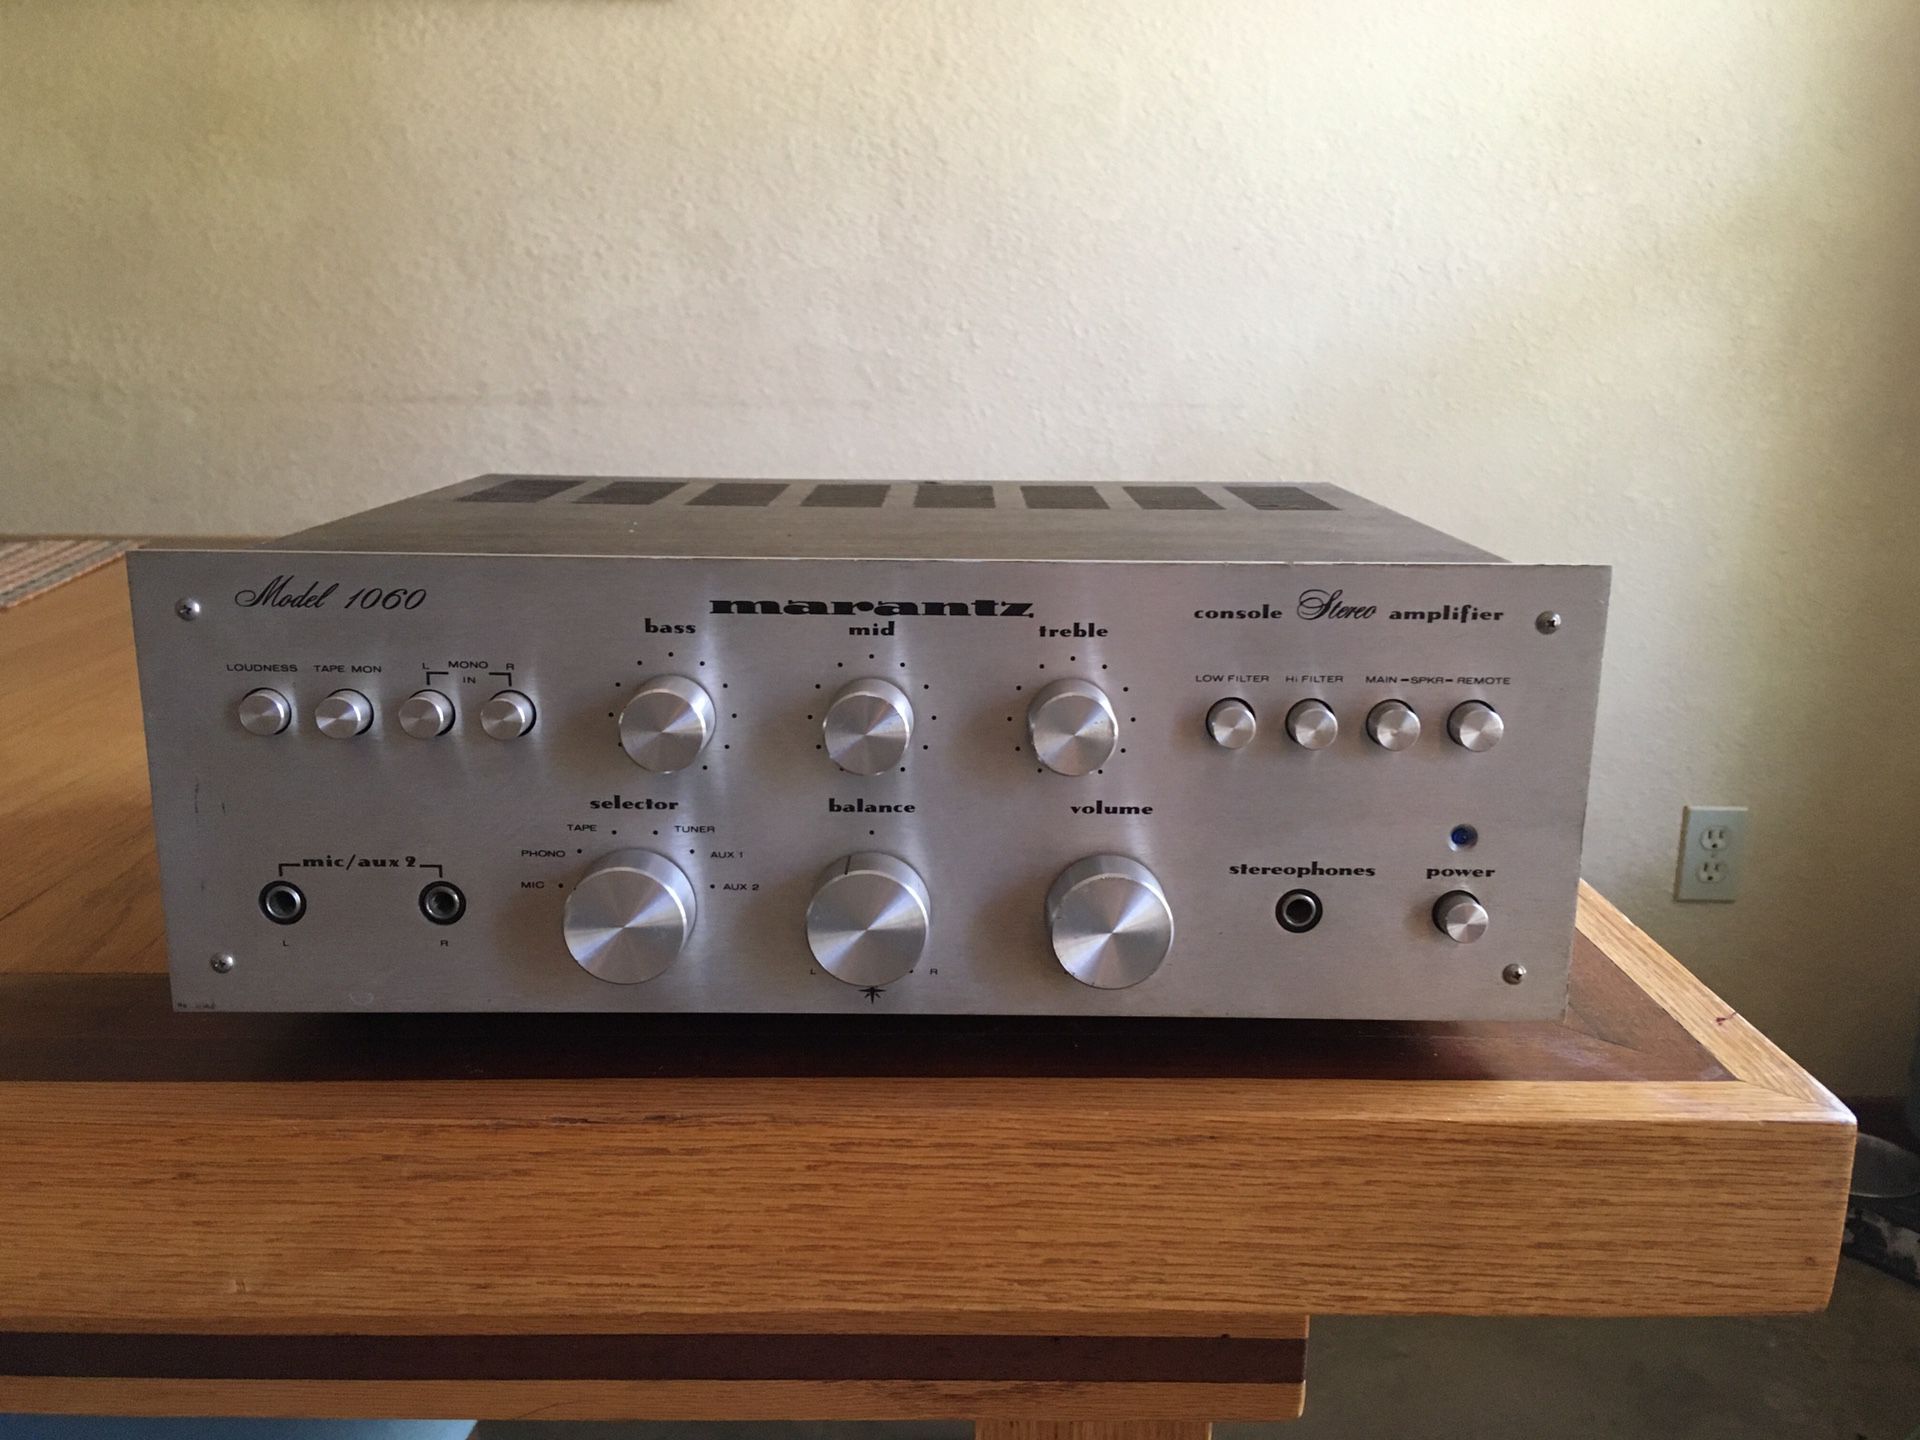 Vintage stereo receiver. Marantz model 1060. Purchased 1978. Has been carefully stored for the last 30 plus years. Works perfectly.